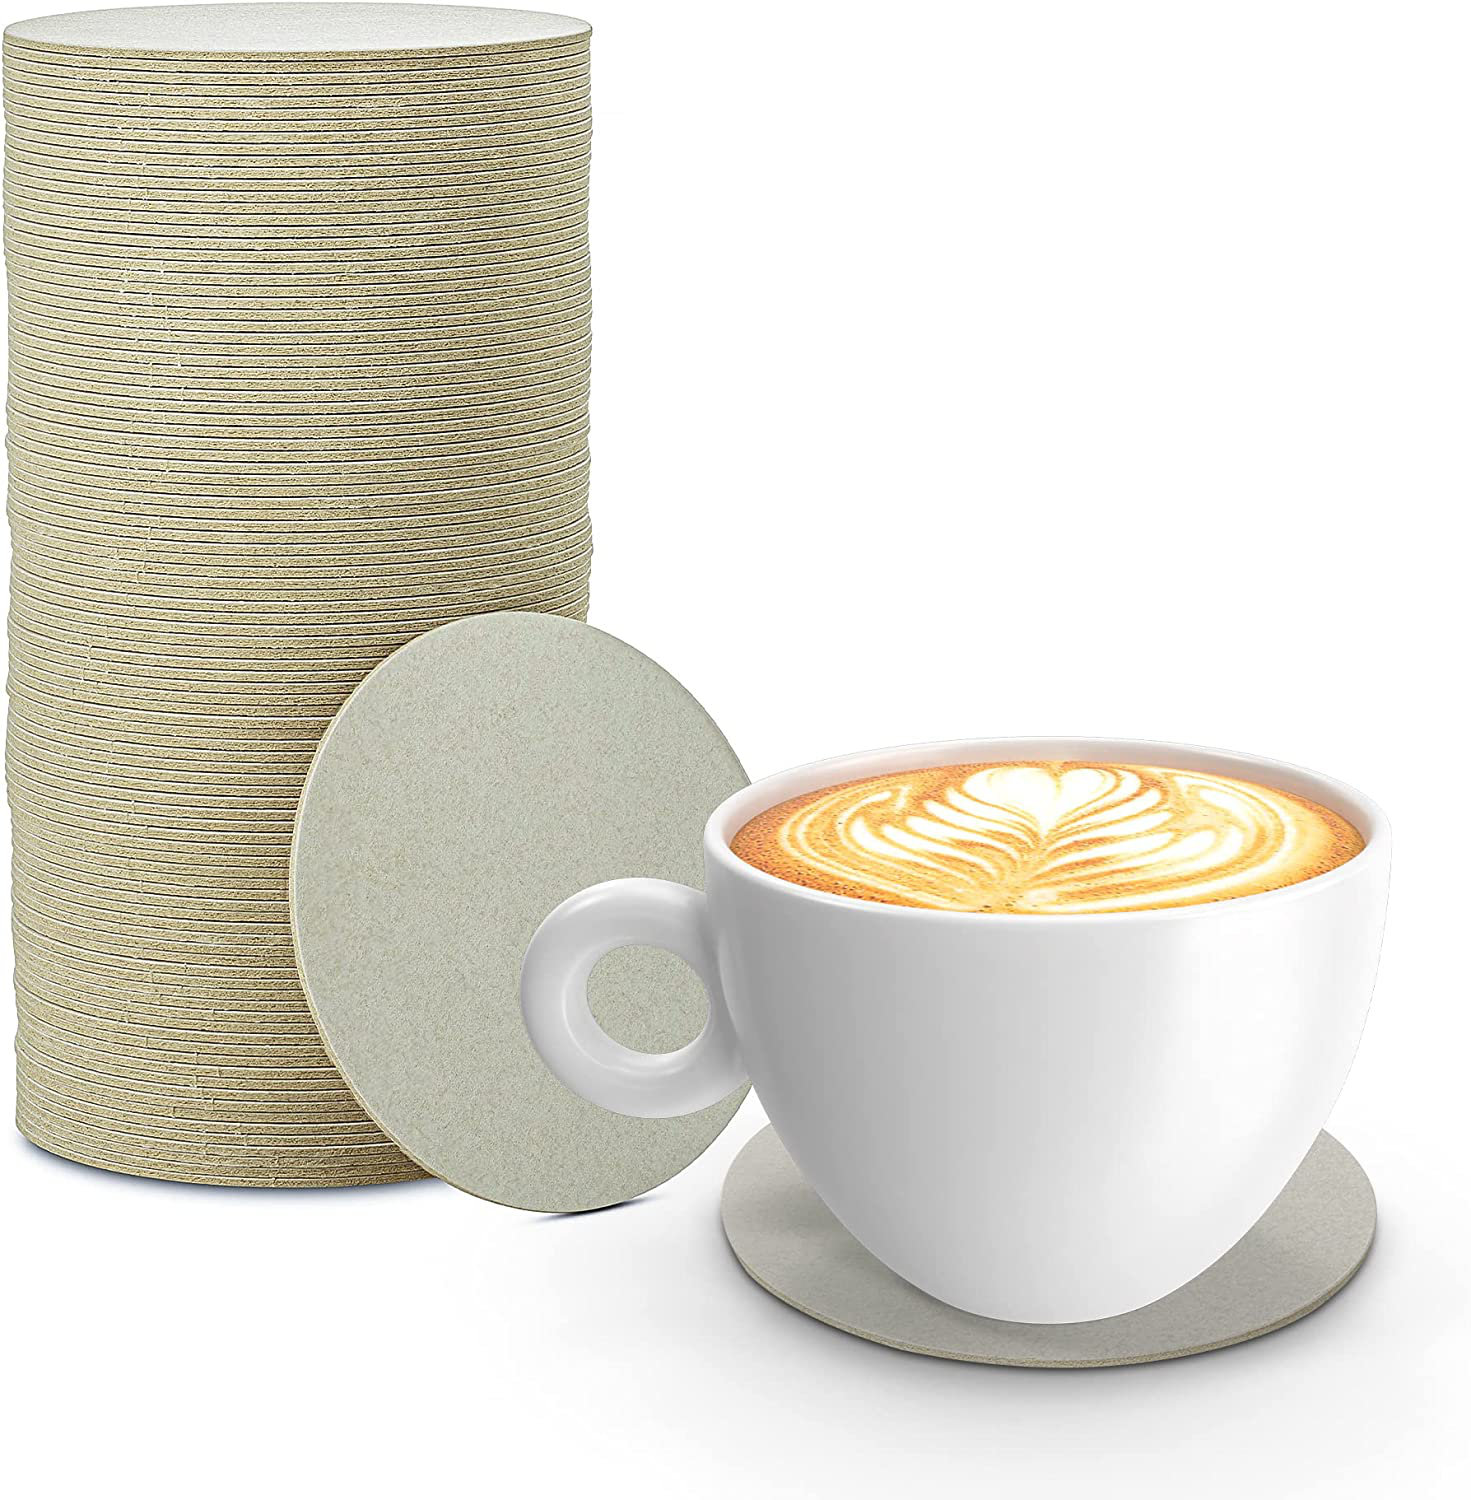 MT Products 4 White Cup Coaster / Blank Paper Coasters for Drinks